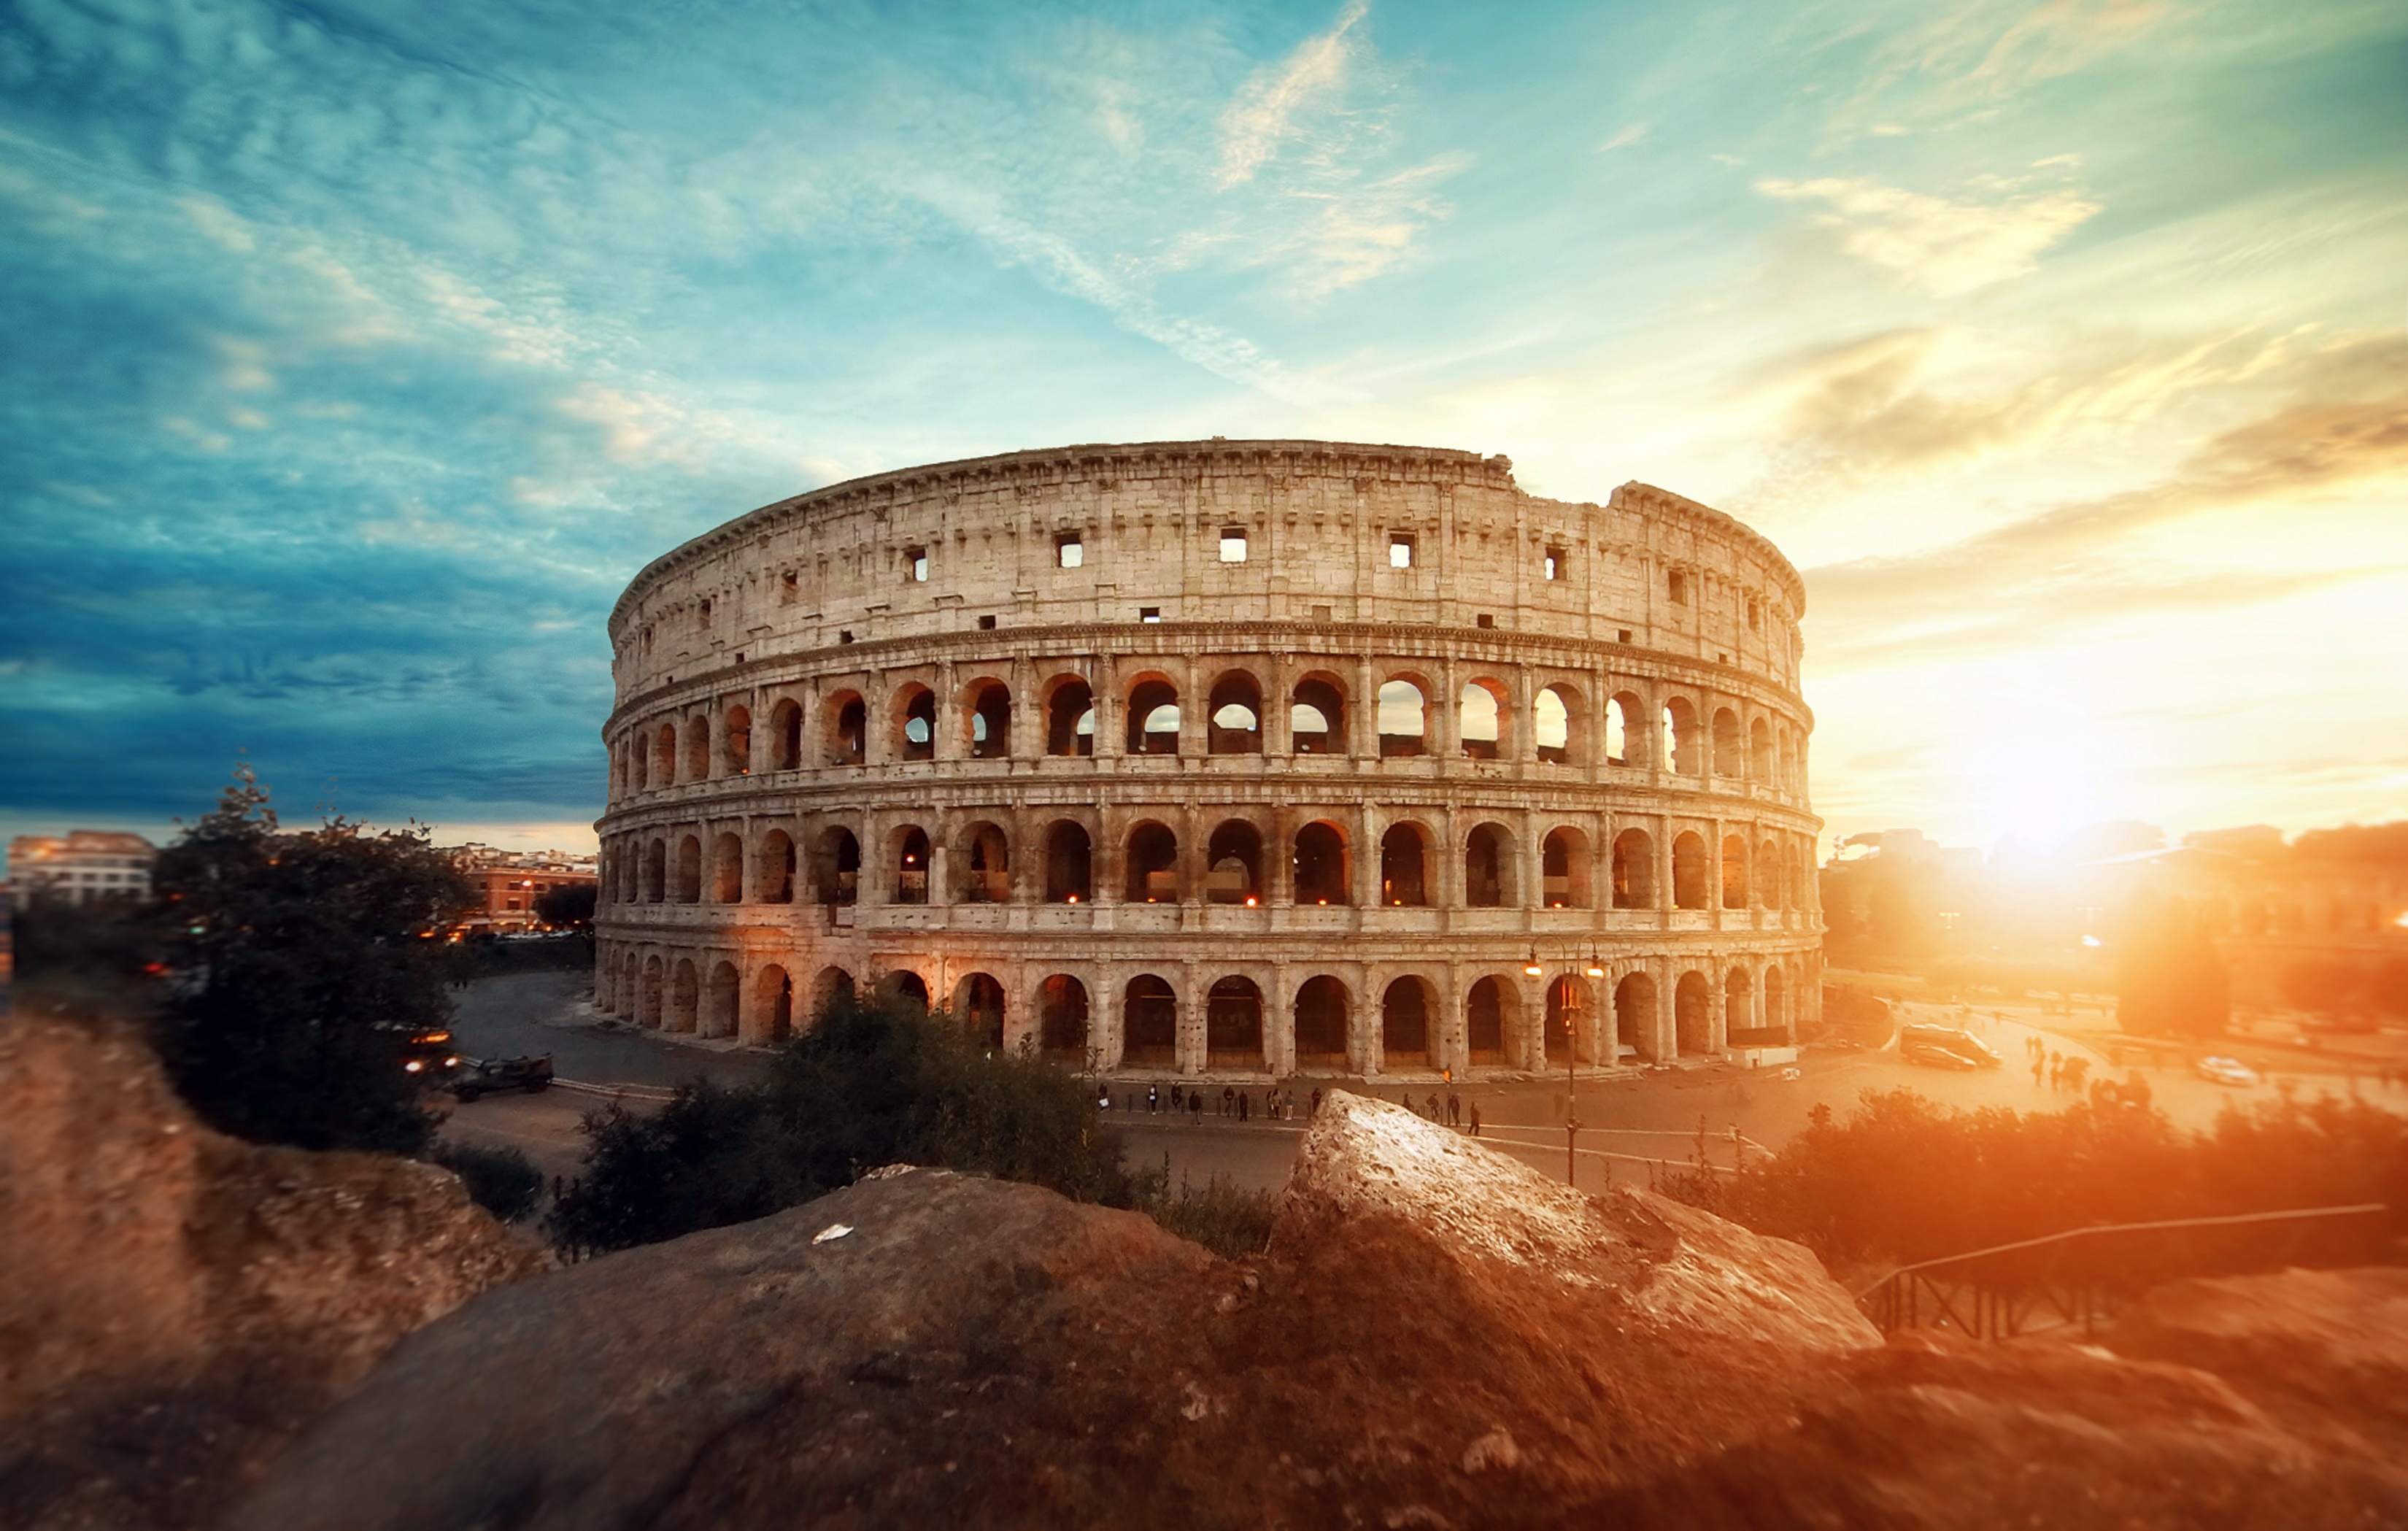 Wallpapers sunset colosseum rome on the desktop